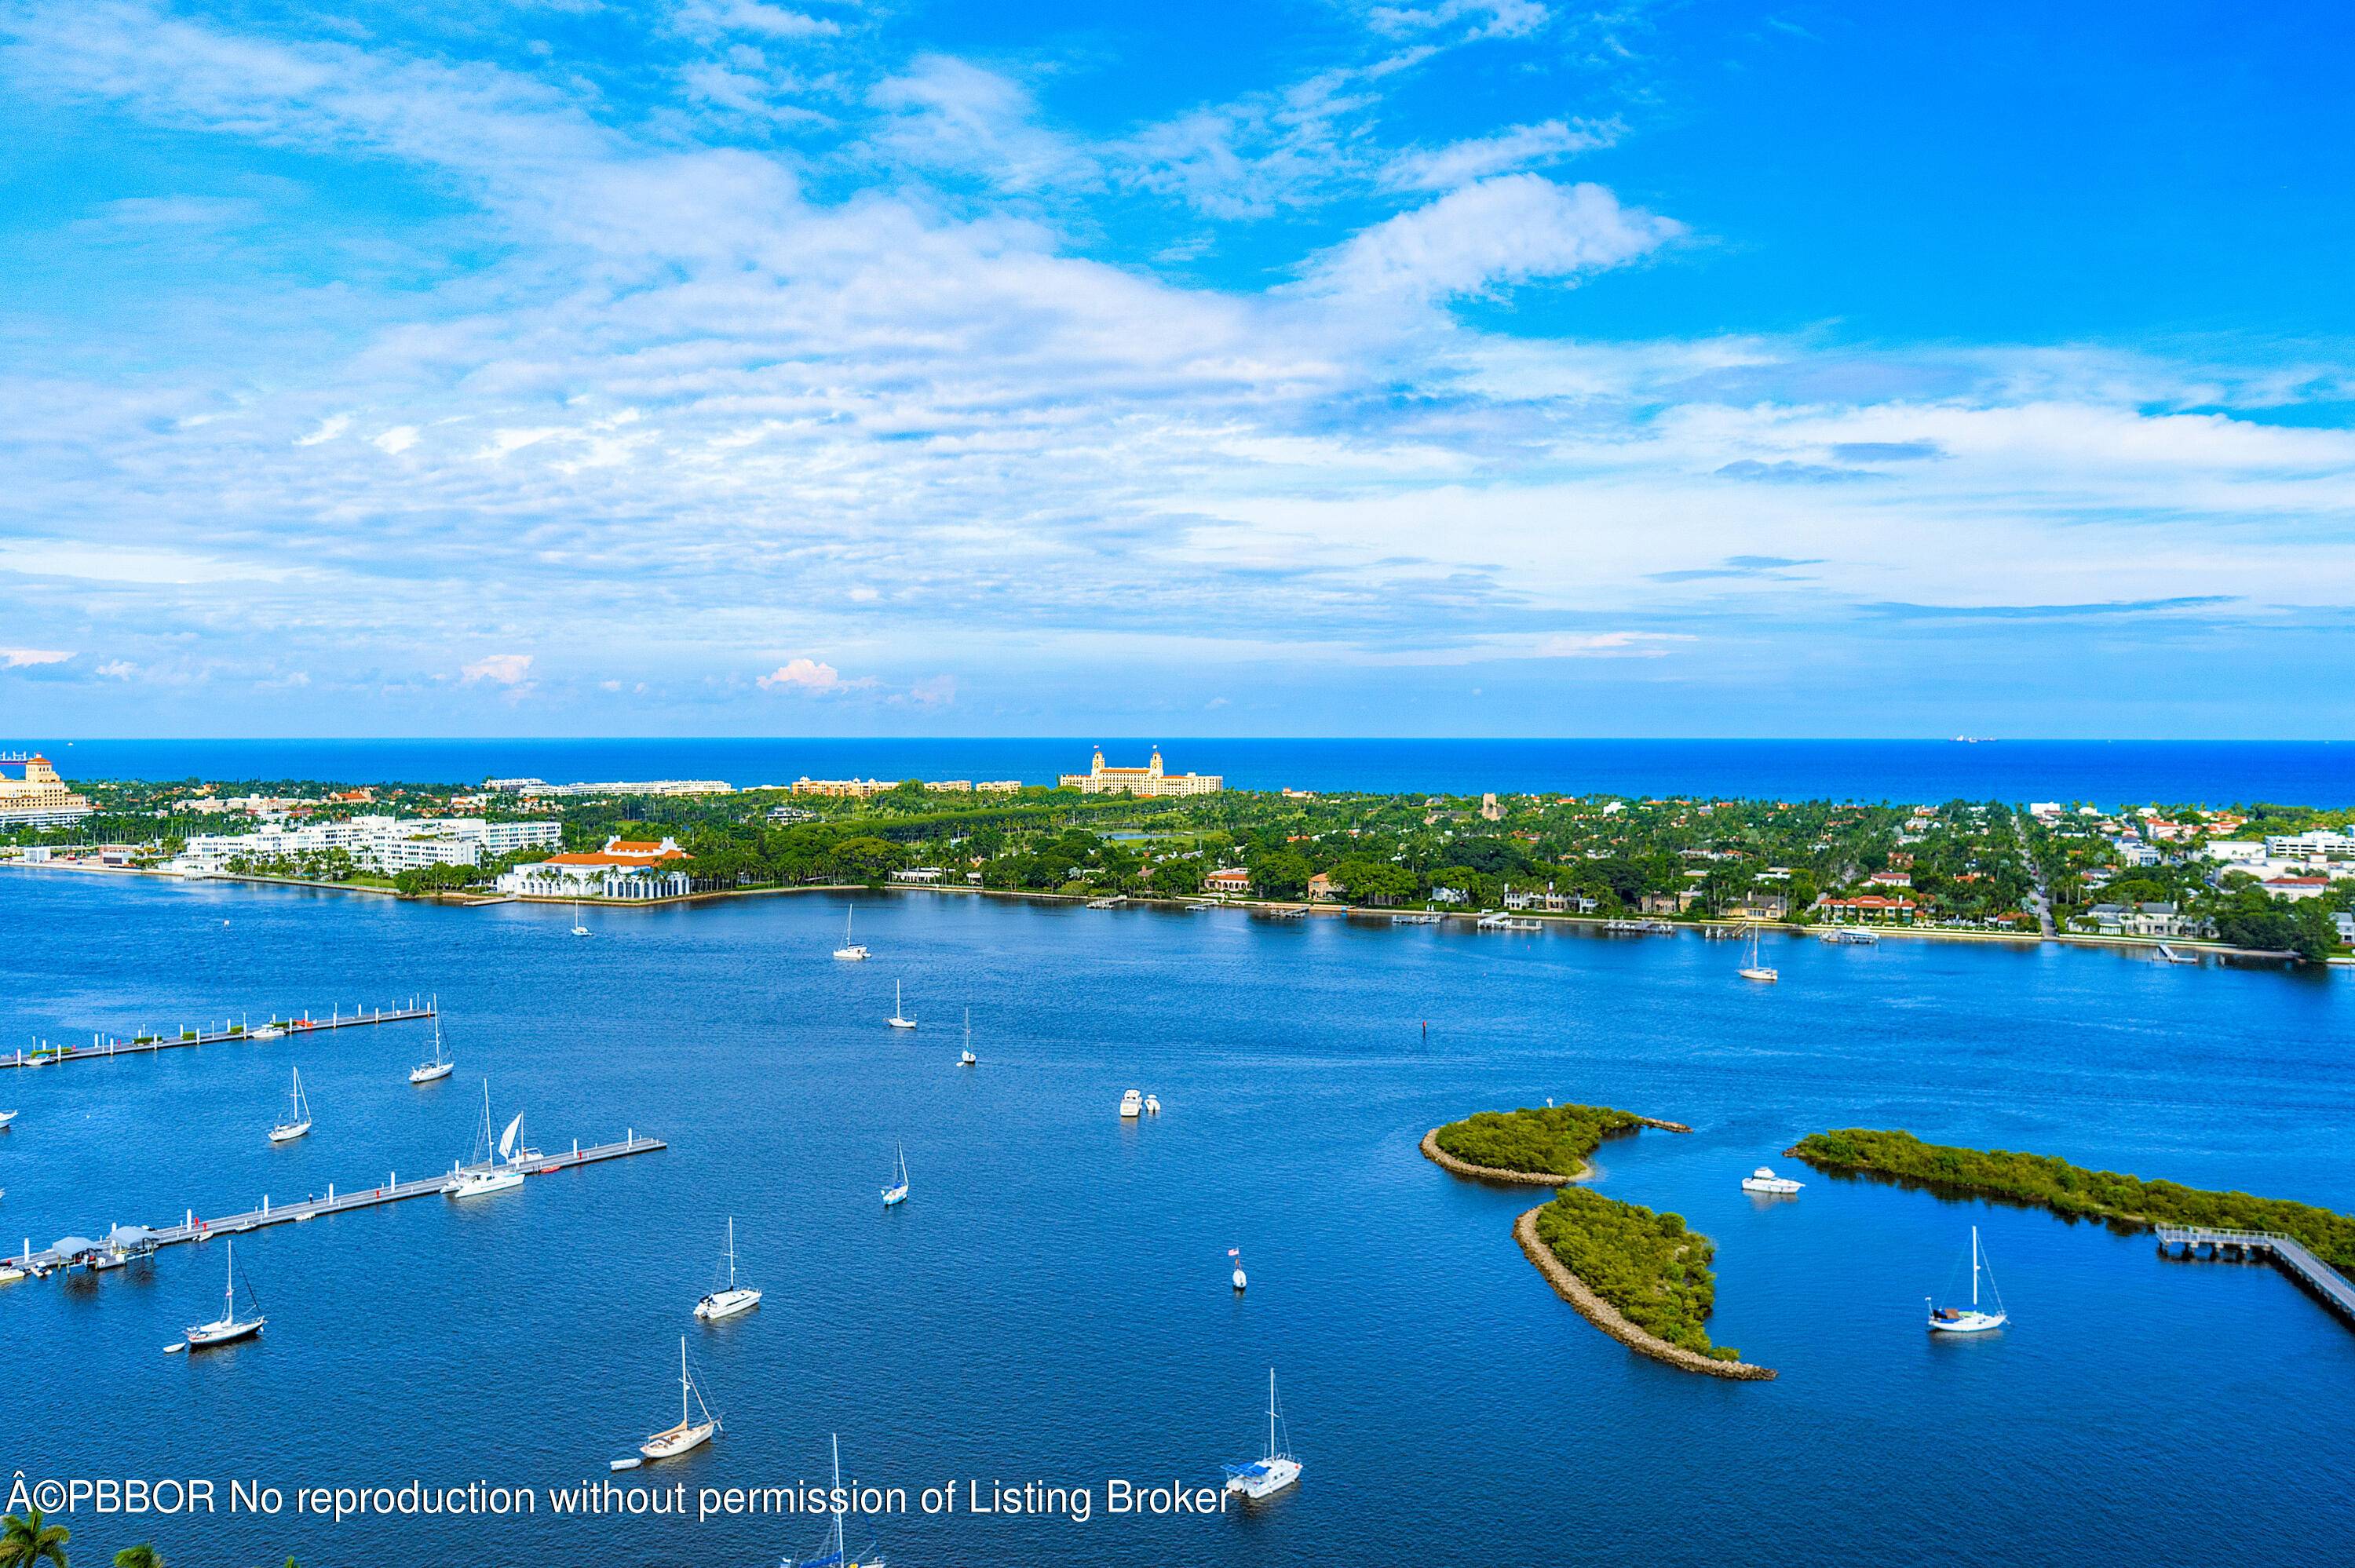 Incredible views of the Intracoastal and Ocean from this high floor, spacious 3 BR 2.